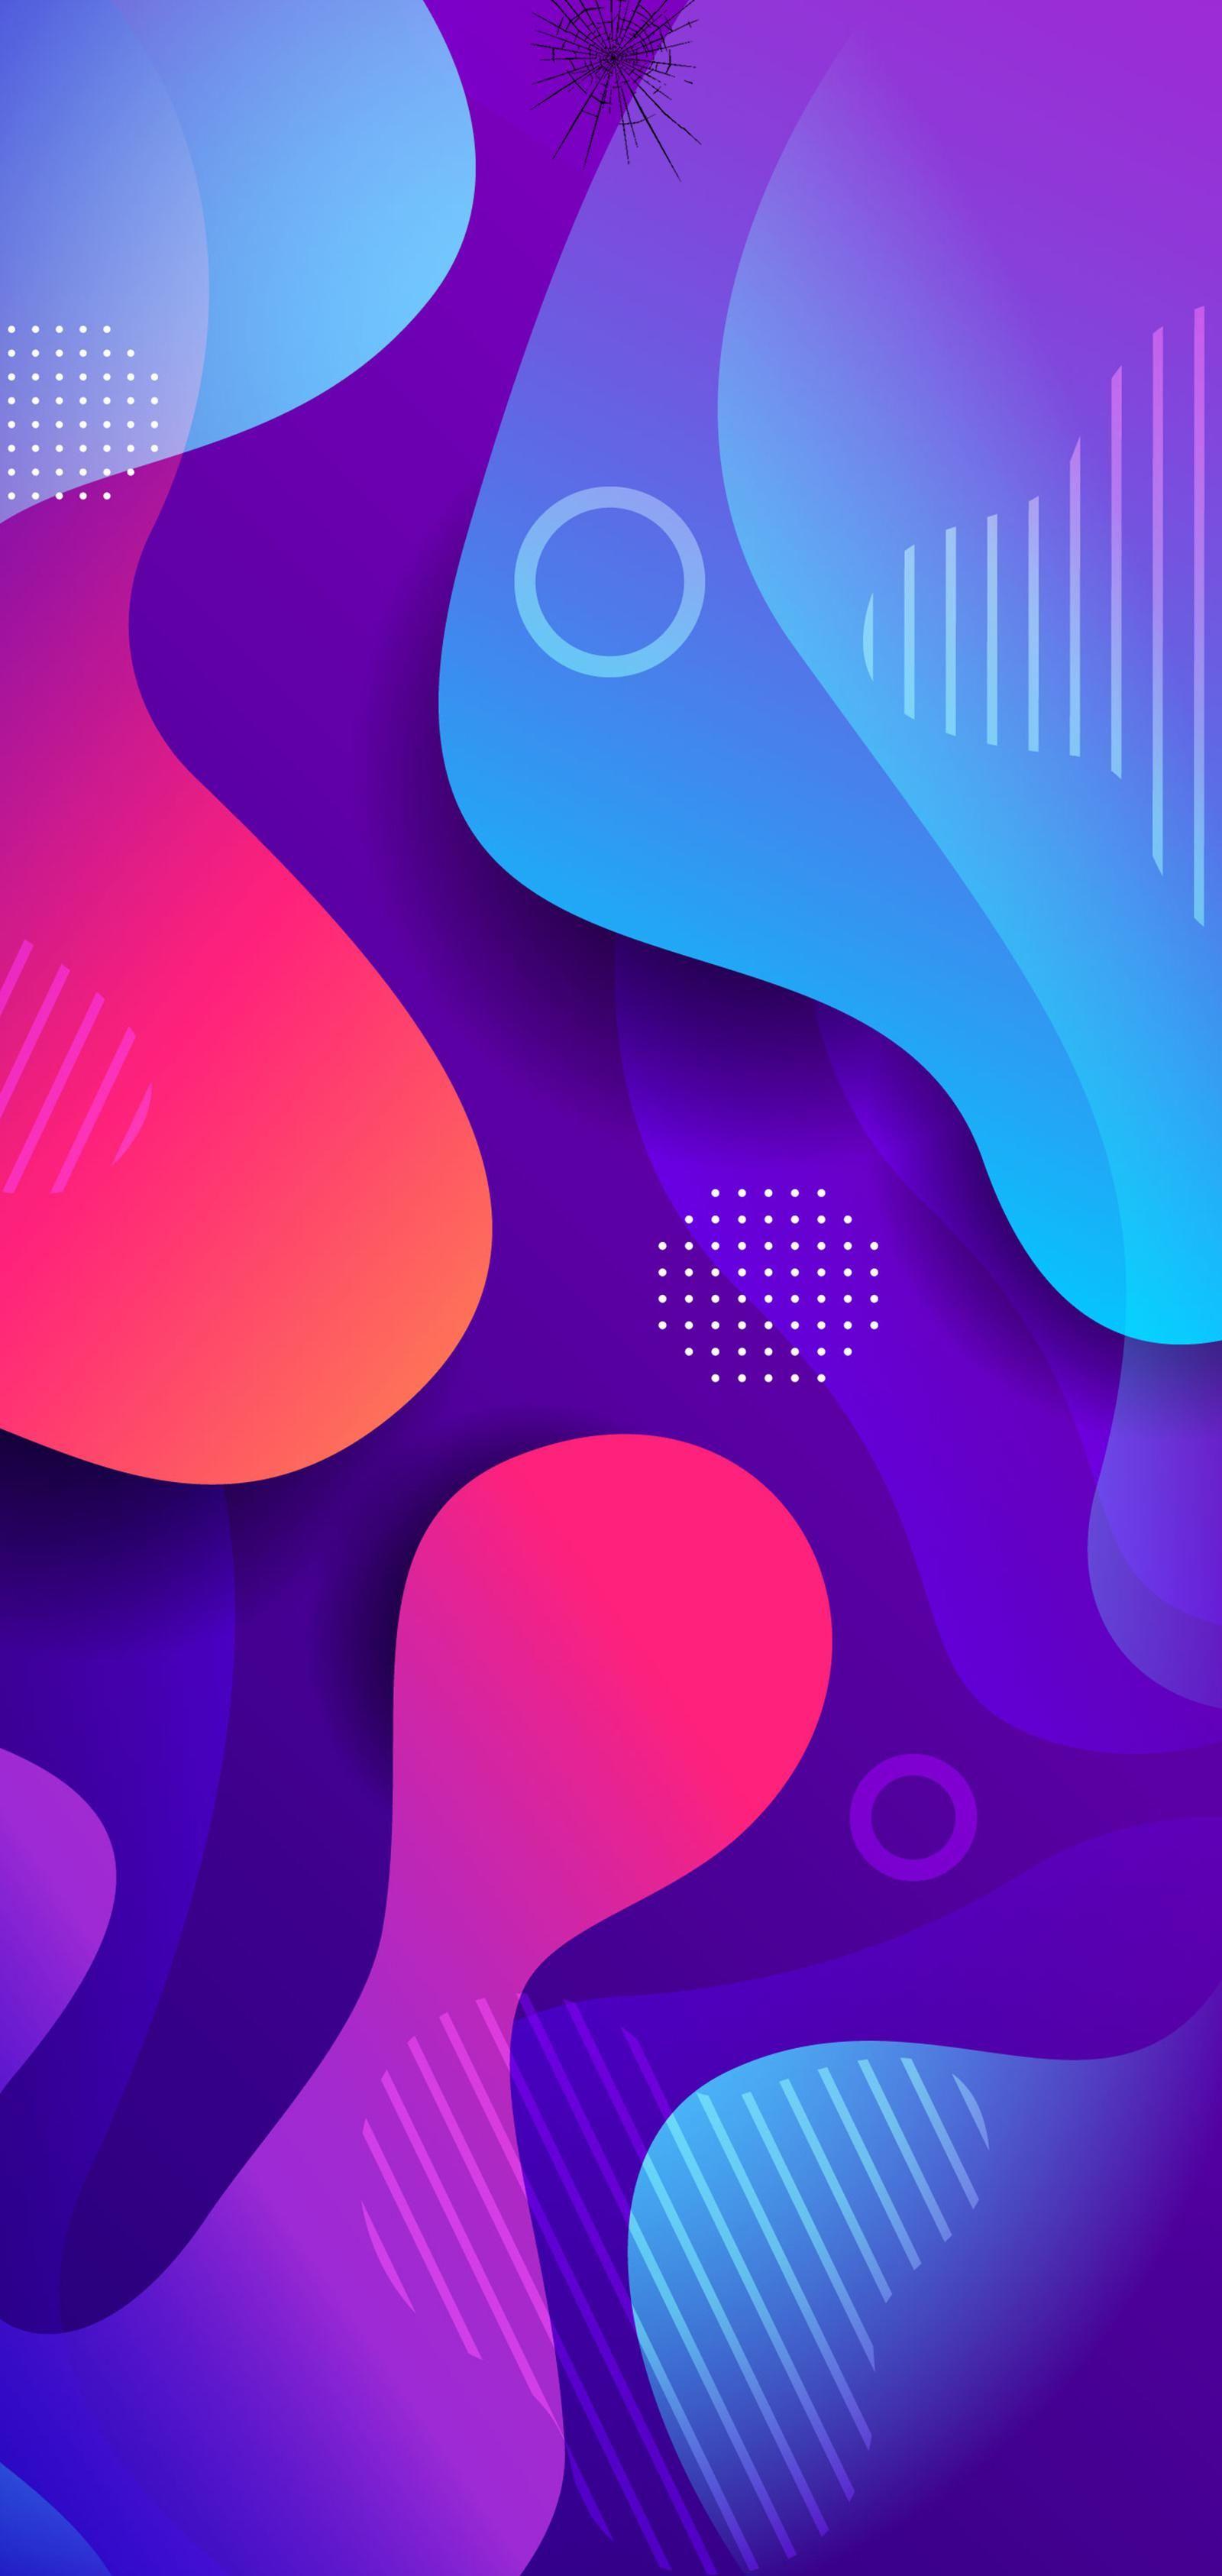 Note 10 Wallpapers